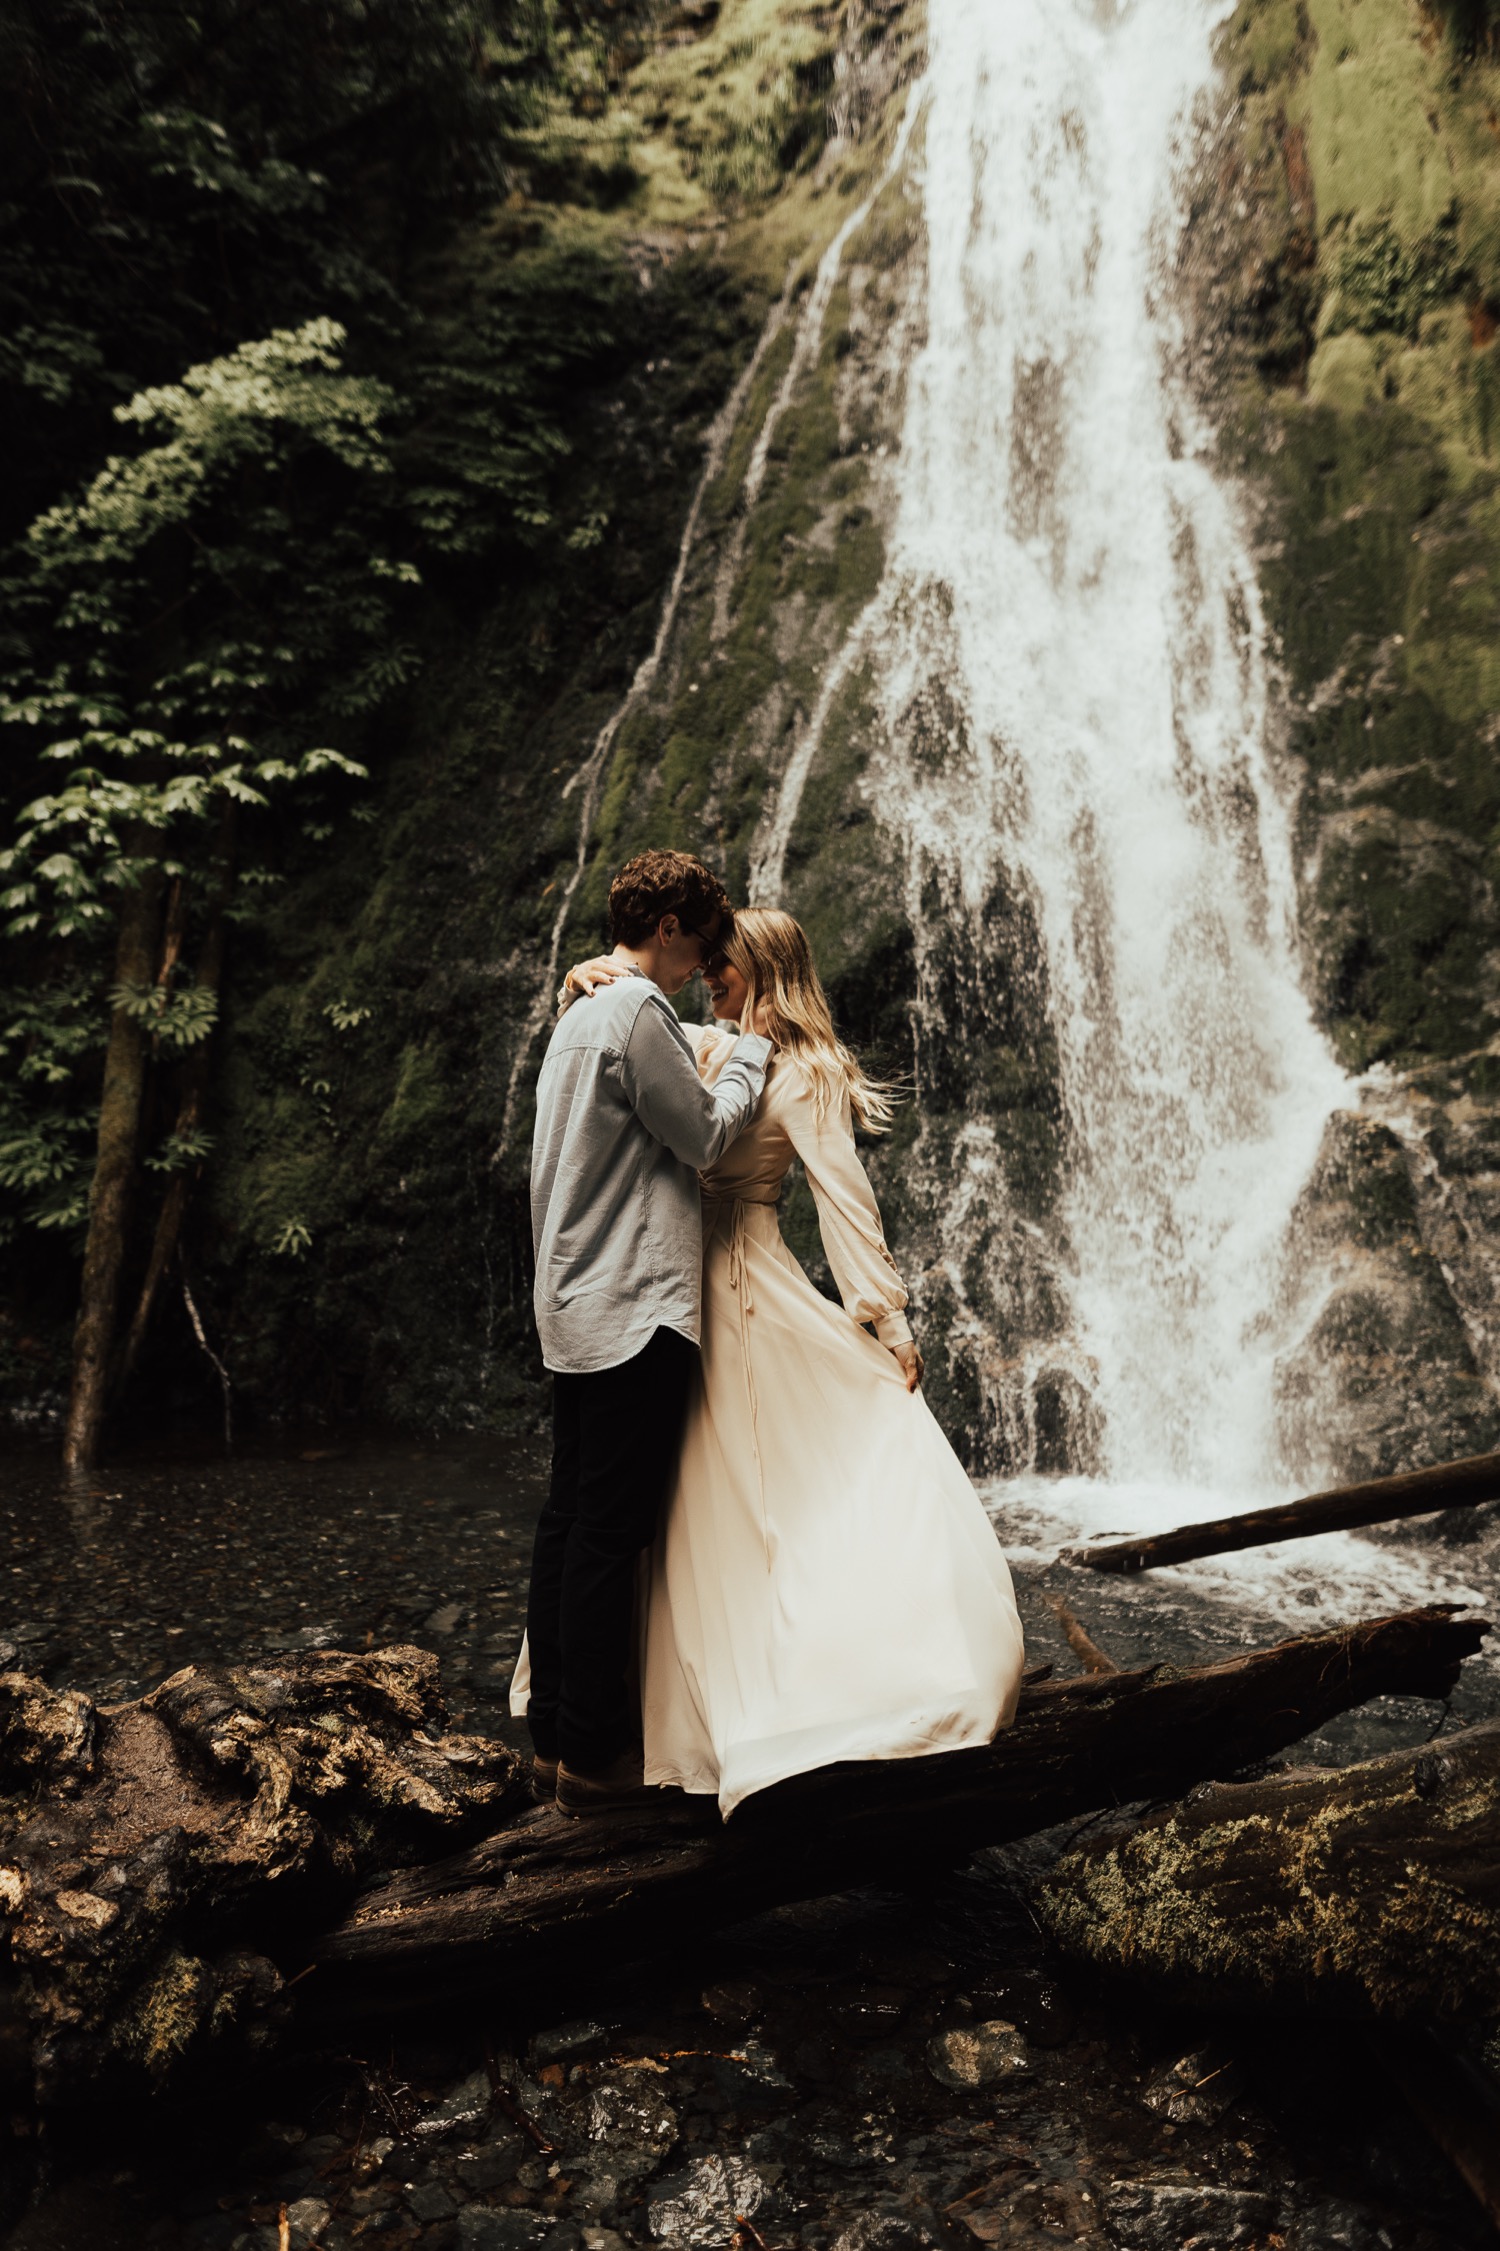 Olympic National Park Intimate Waterfall Elopement